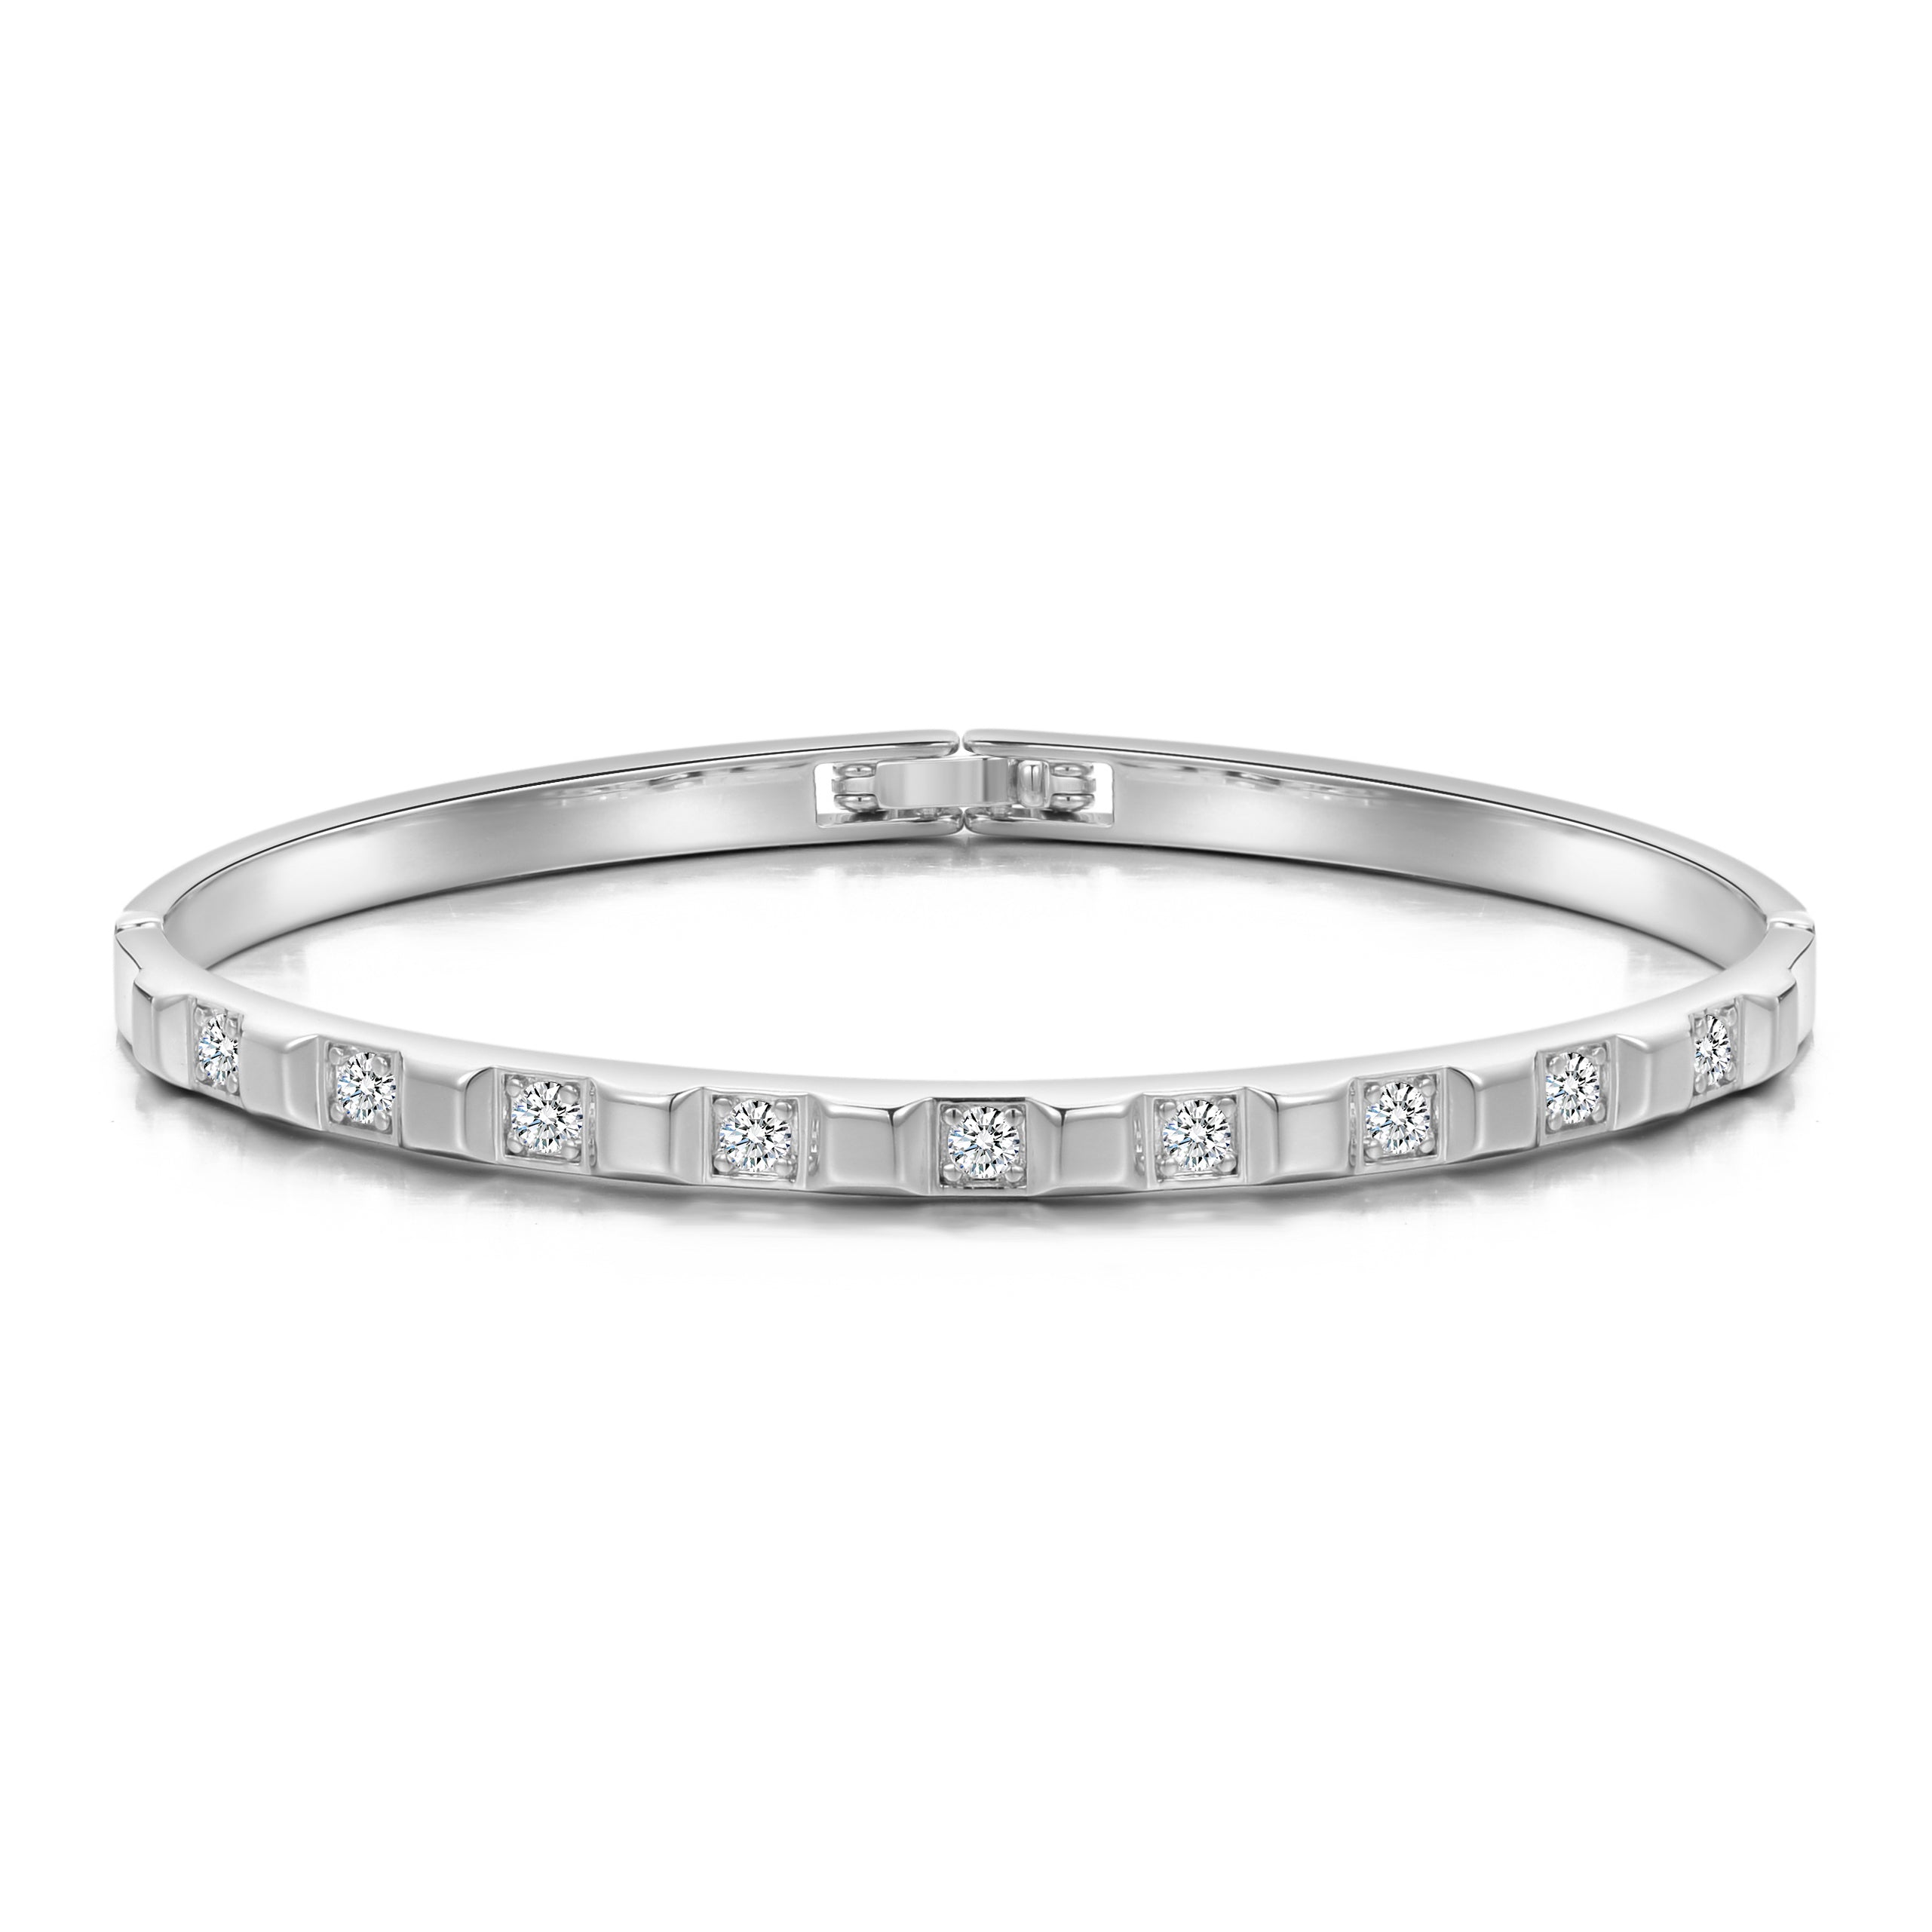 Silver Plated Cubic Bangle Created with Zircondia® Crystals by Philip Jones Jewellery